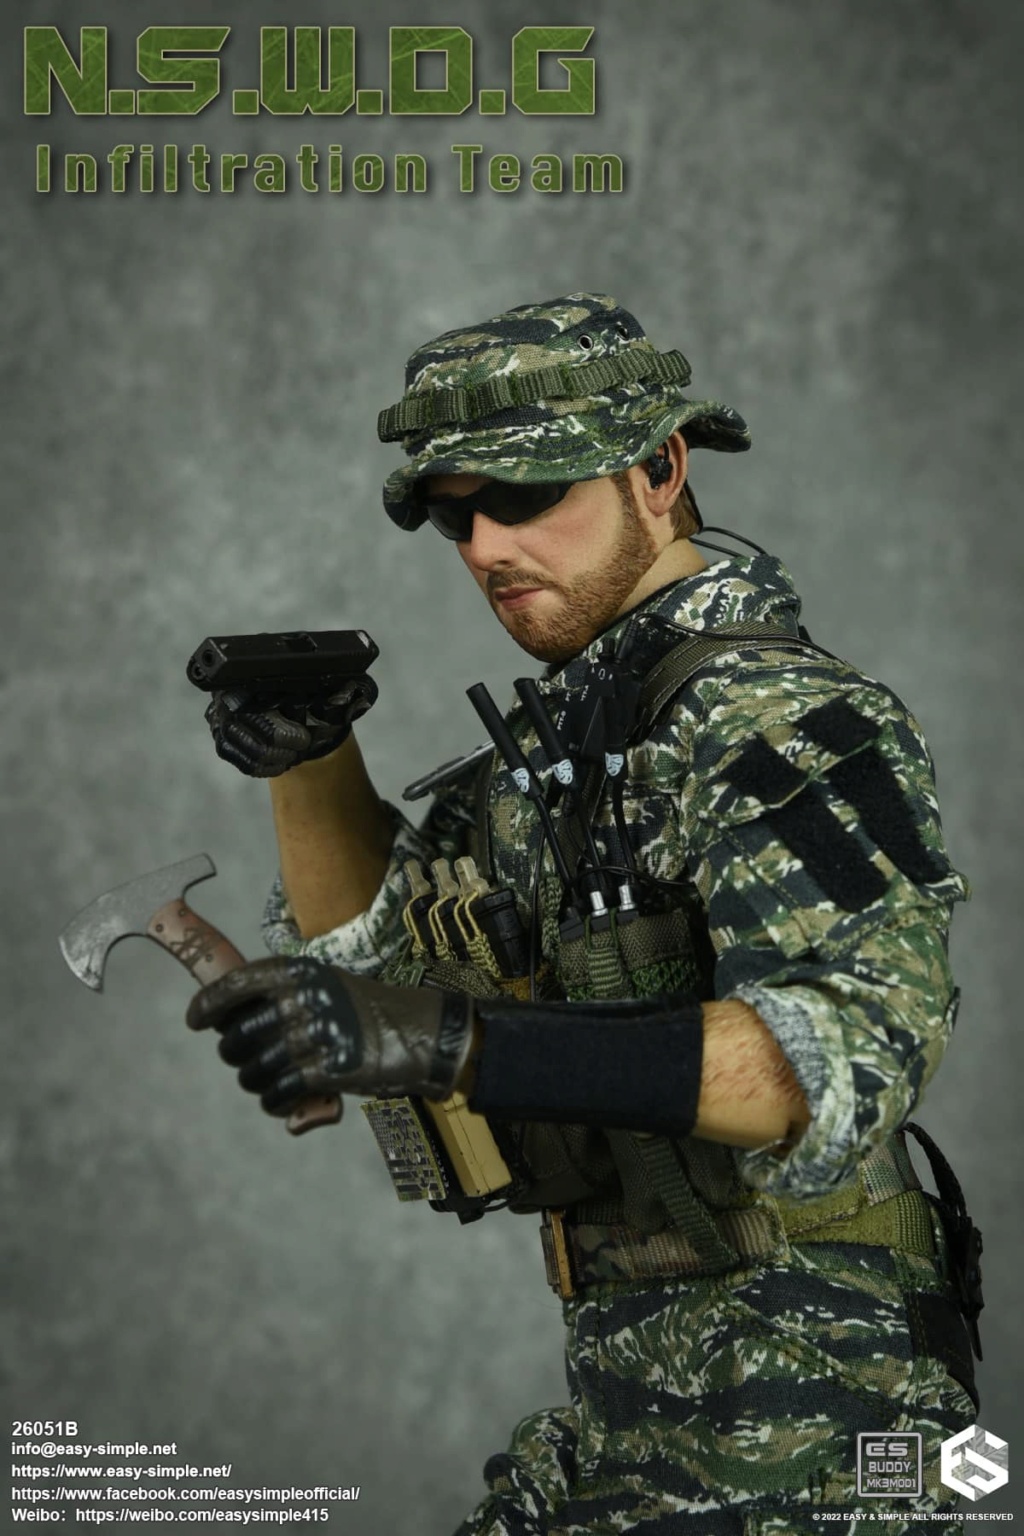 NSWDG - NEW PRODUCT: EASY AND SIMPLE 1/6 SCALE FIGURE: N.S.W.D.G INFILTRATION TEAM - (2 Versions) 11857